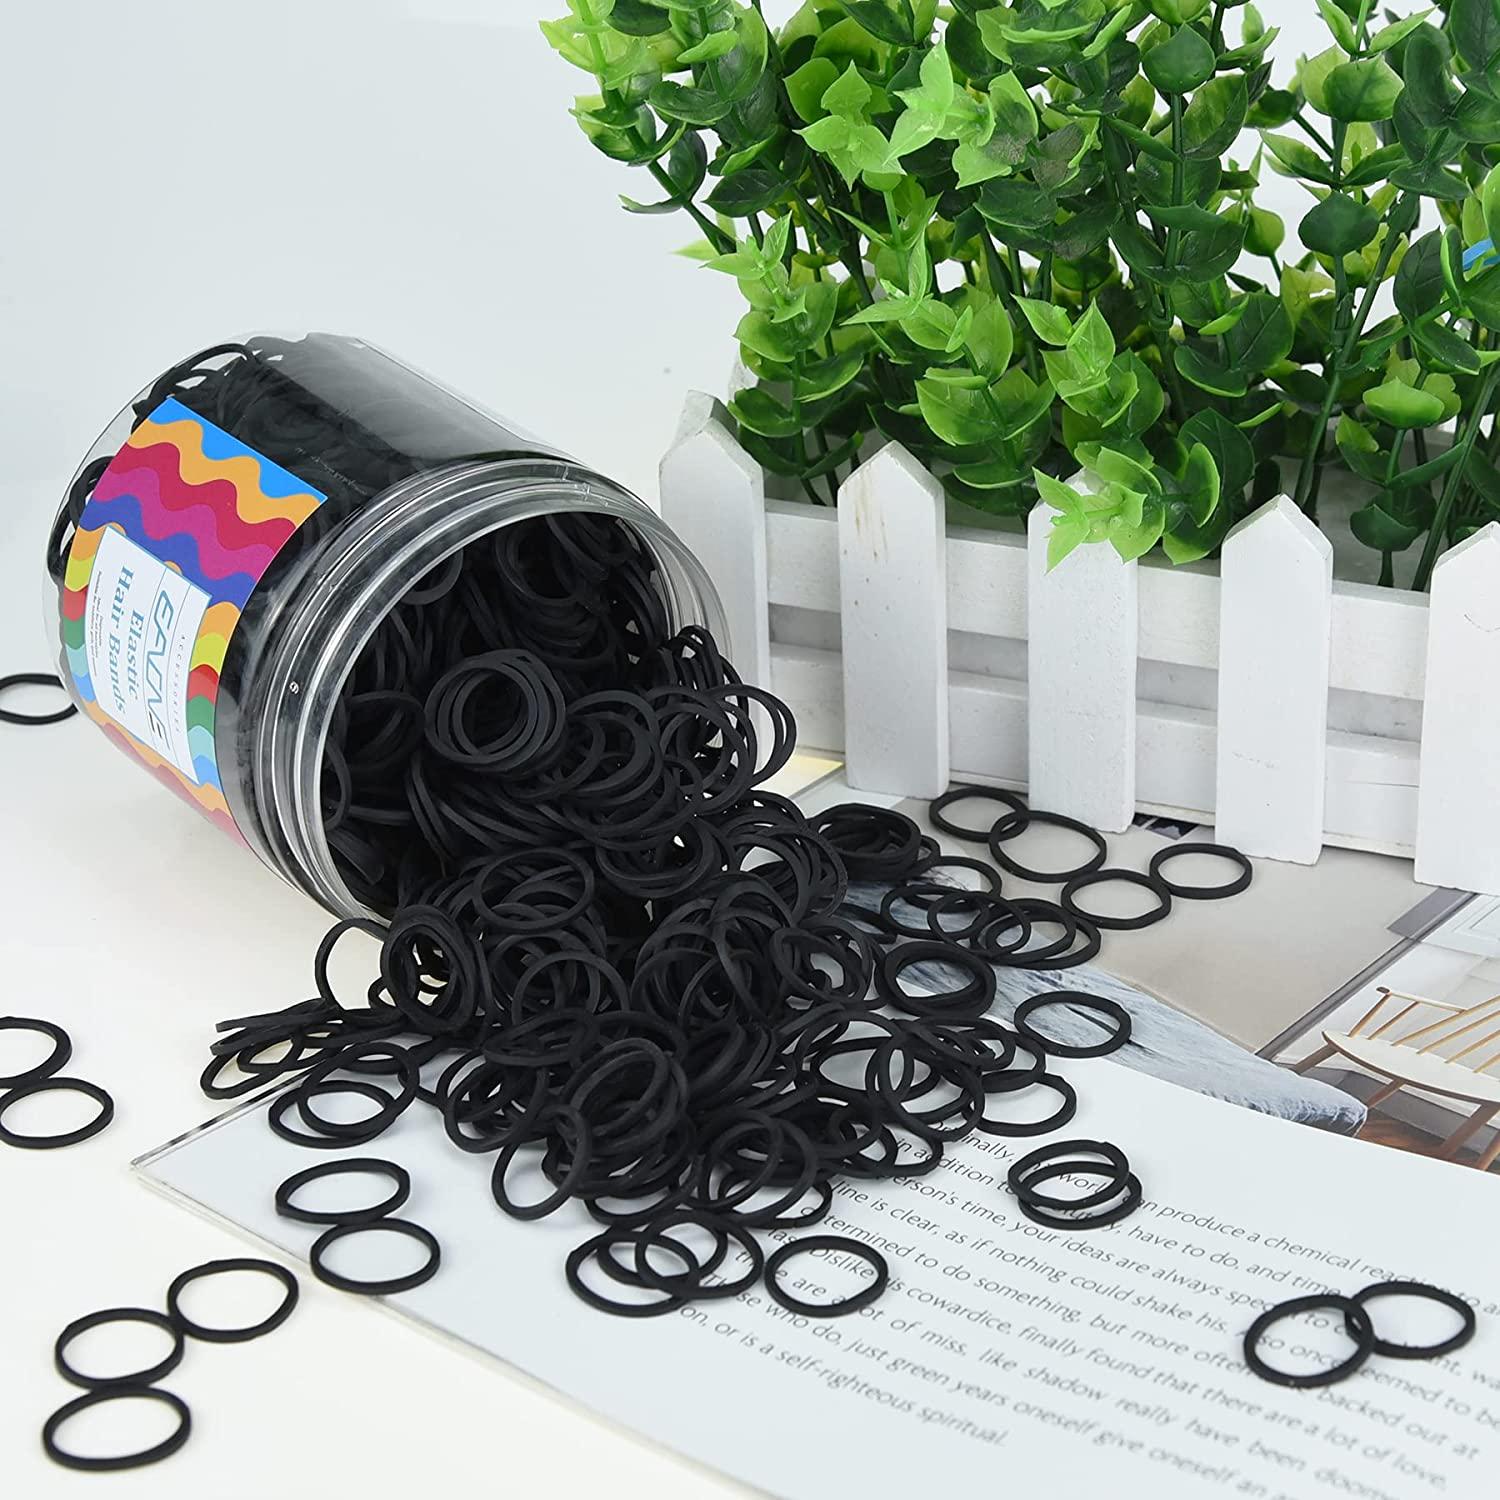 EAONE 1500Pcs Small Hair Bands Baby Hair Ties Tiny Elastics Rubber Bands  for Girls and Women with Box Packaged, Black 1500 Count (Pack of 1) Black